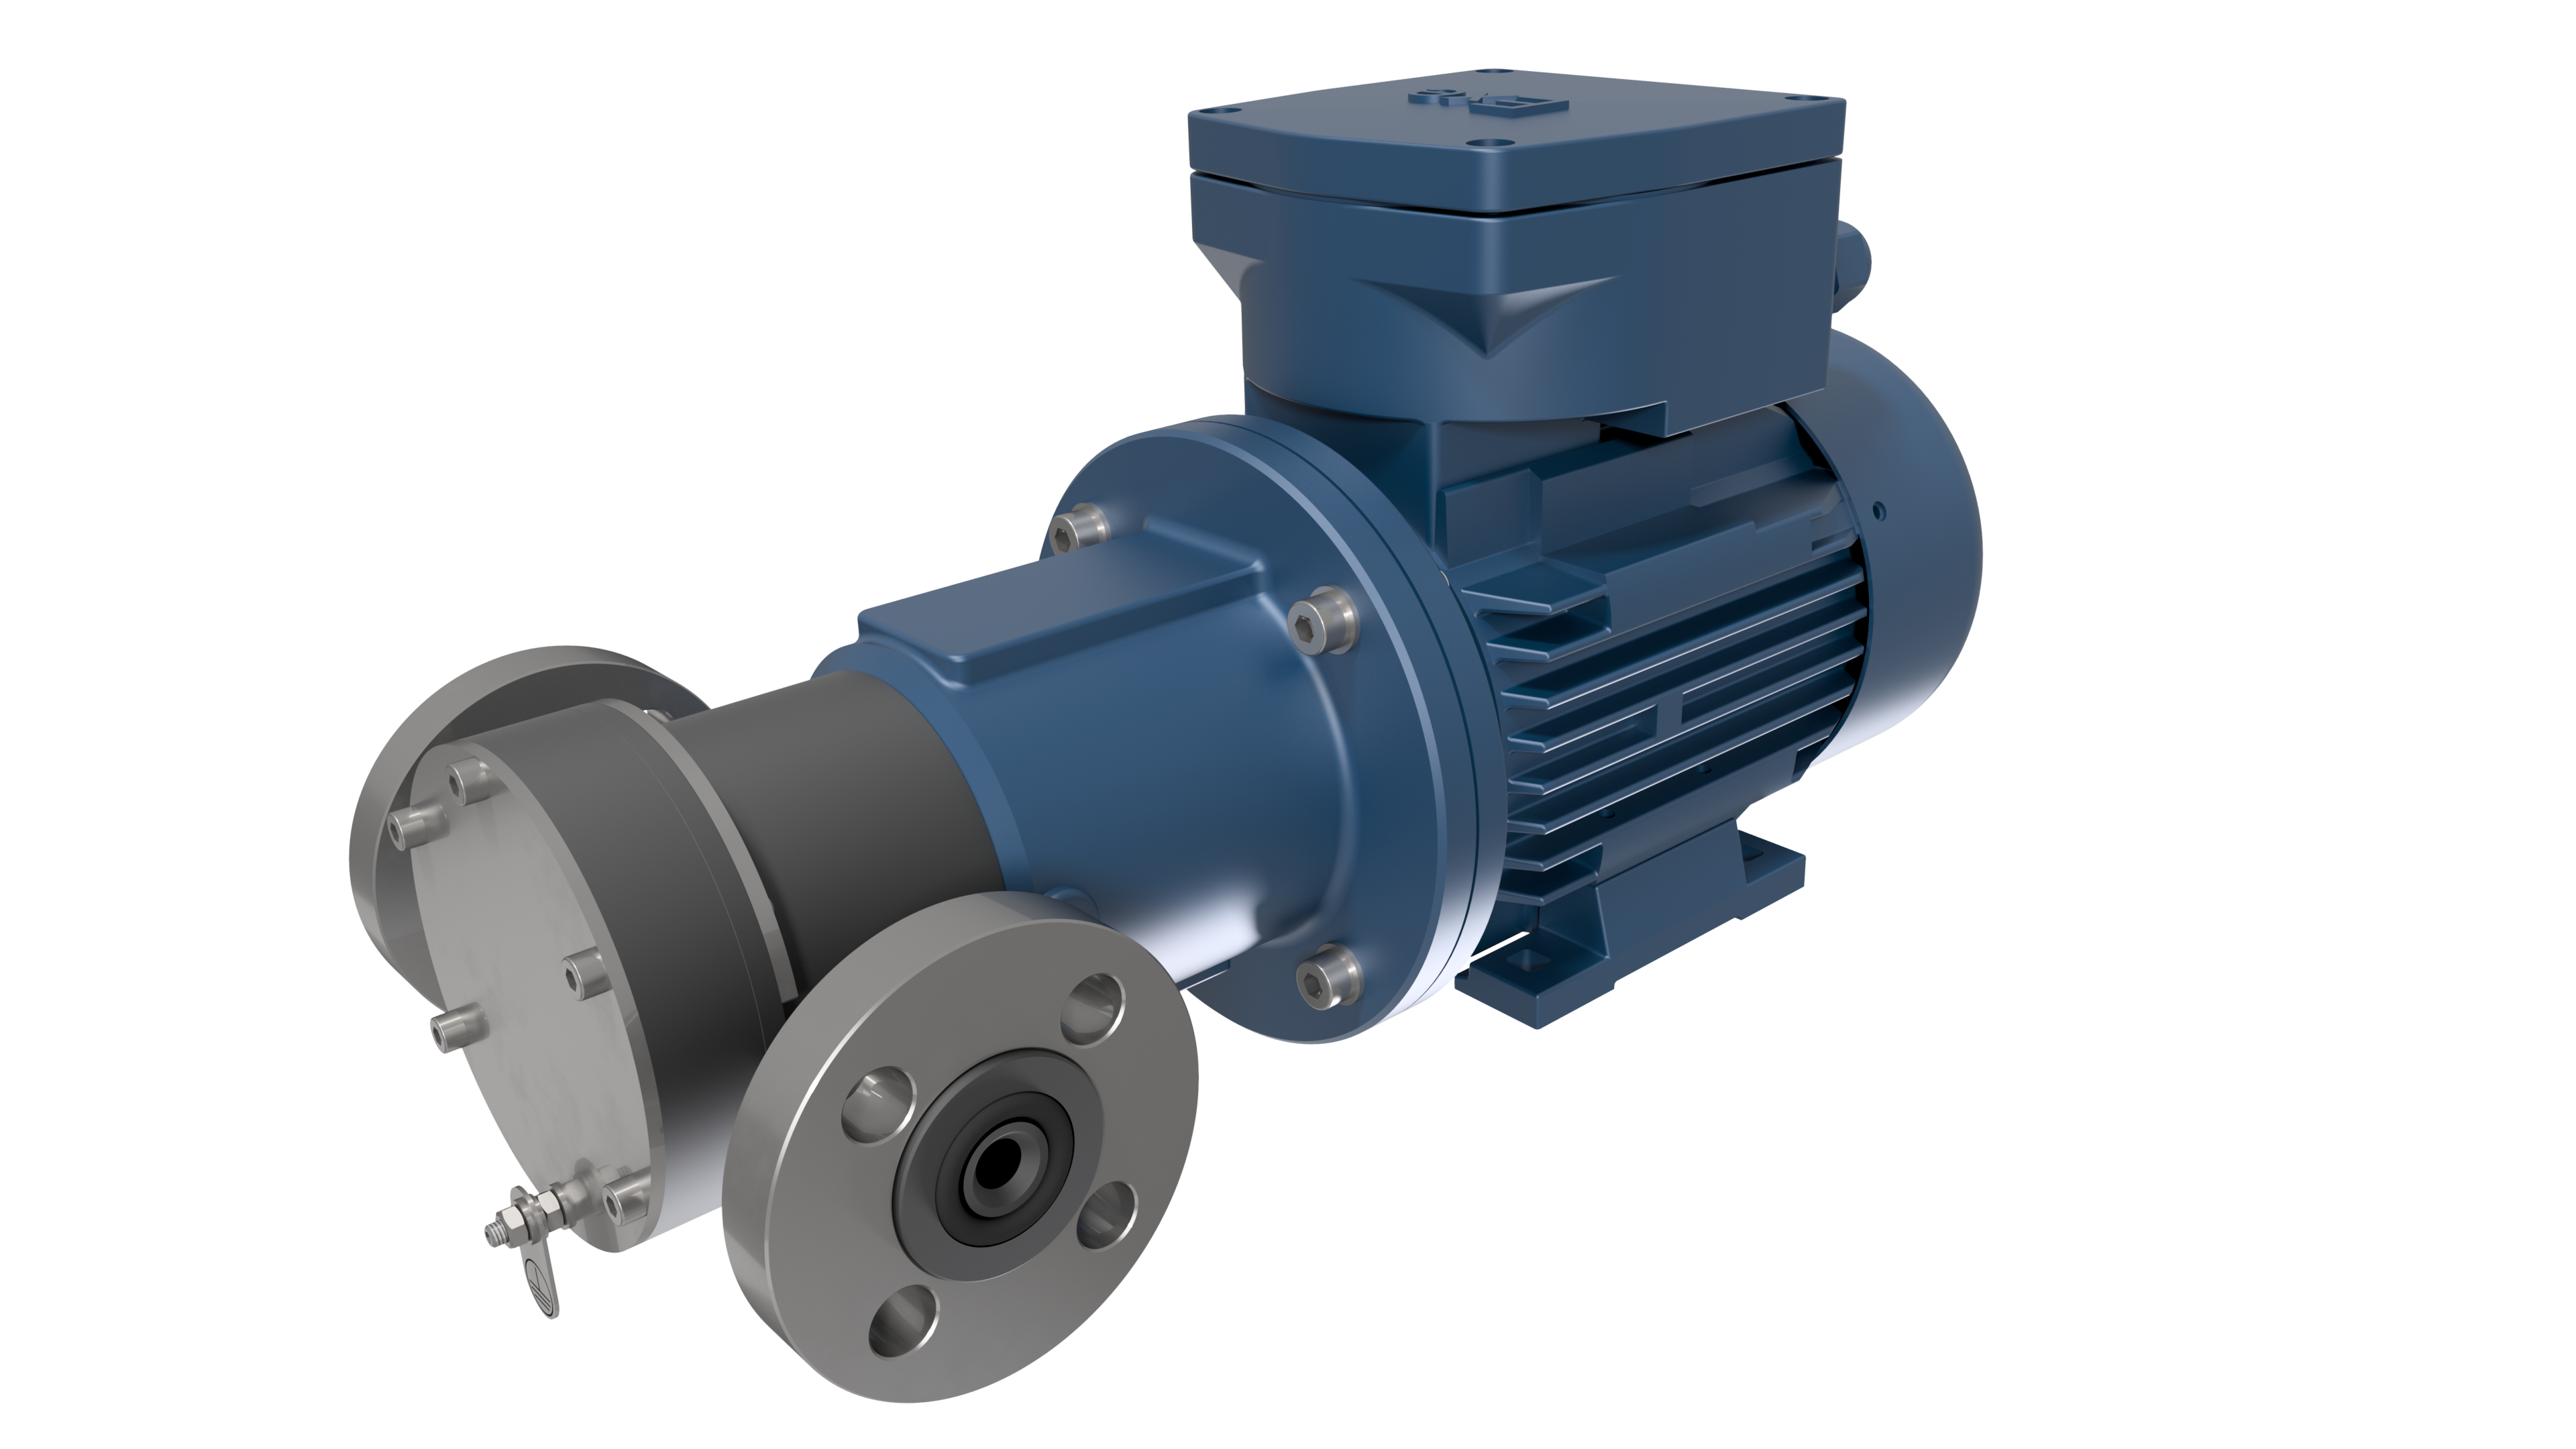 TEF-MAG® 201 magnetic driven external gear pump made of electrically conductive PEEK with a pressure-resistant encapsulated three-phase motor